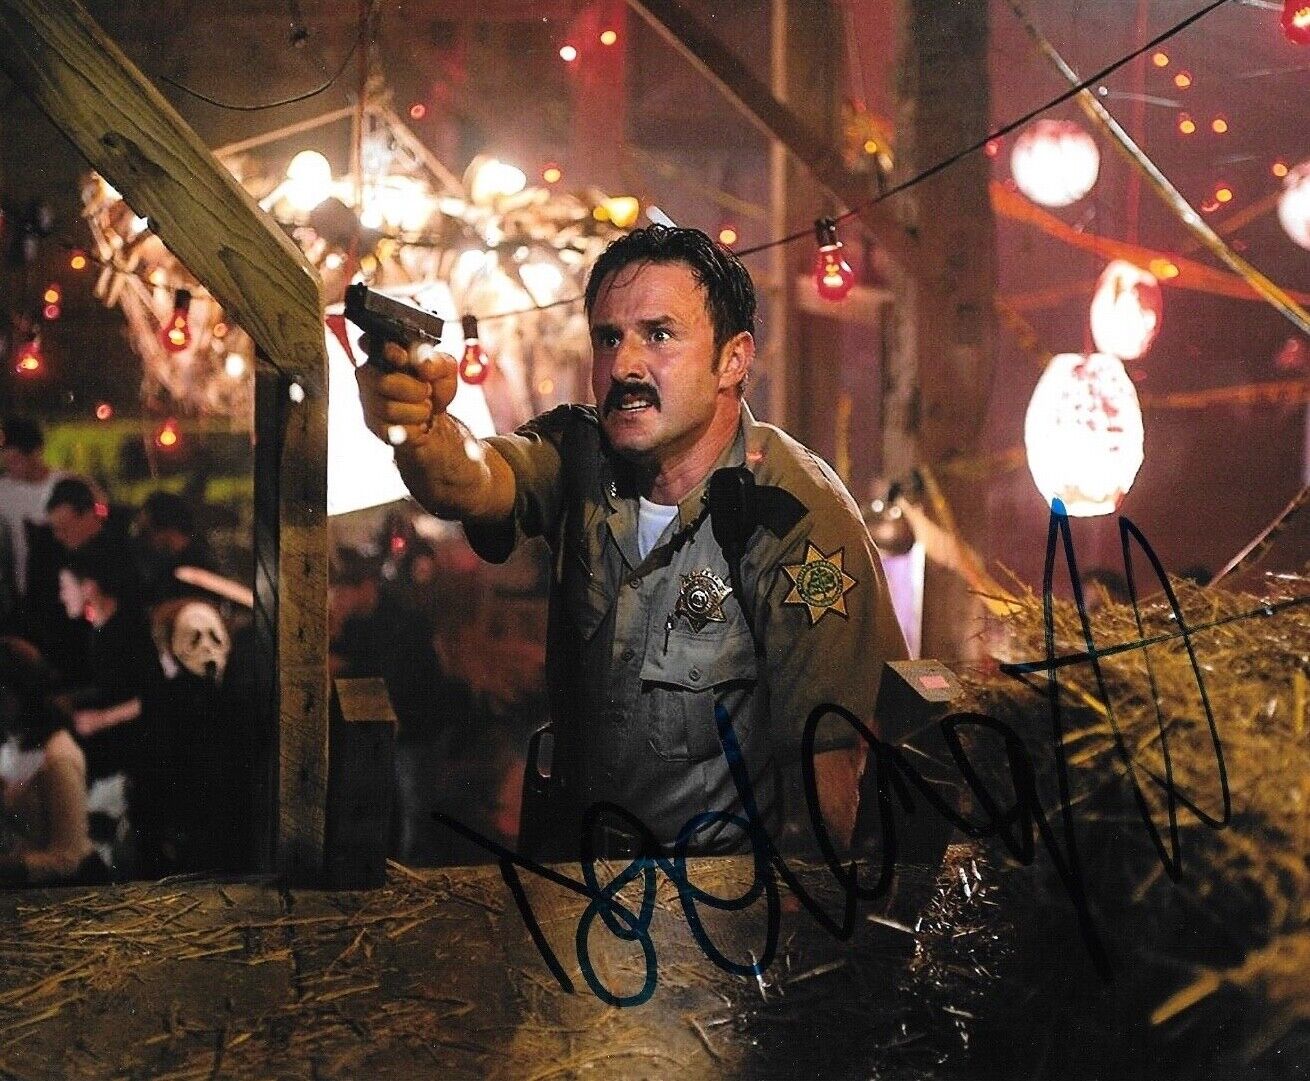 * DAVID ARQUETTE * signed autographed 8x10 Photo Poster painting * SCREAM * 7